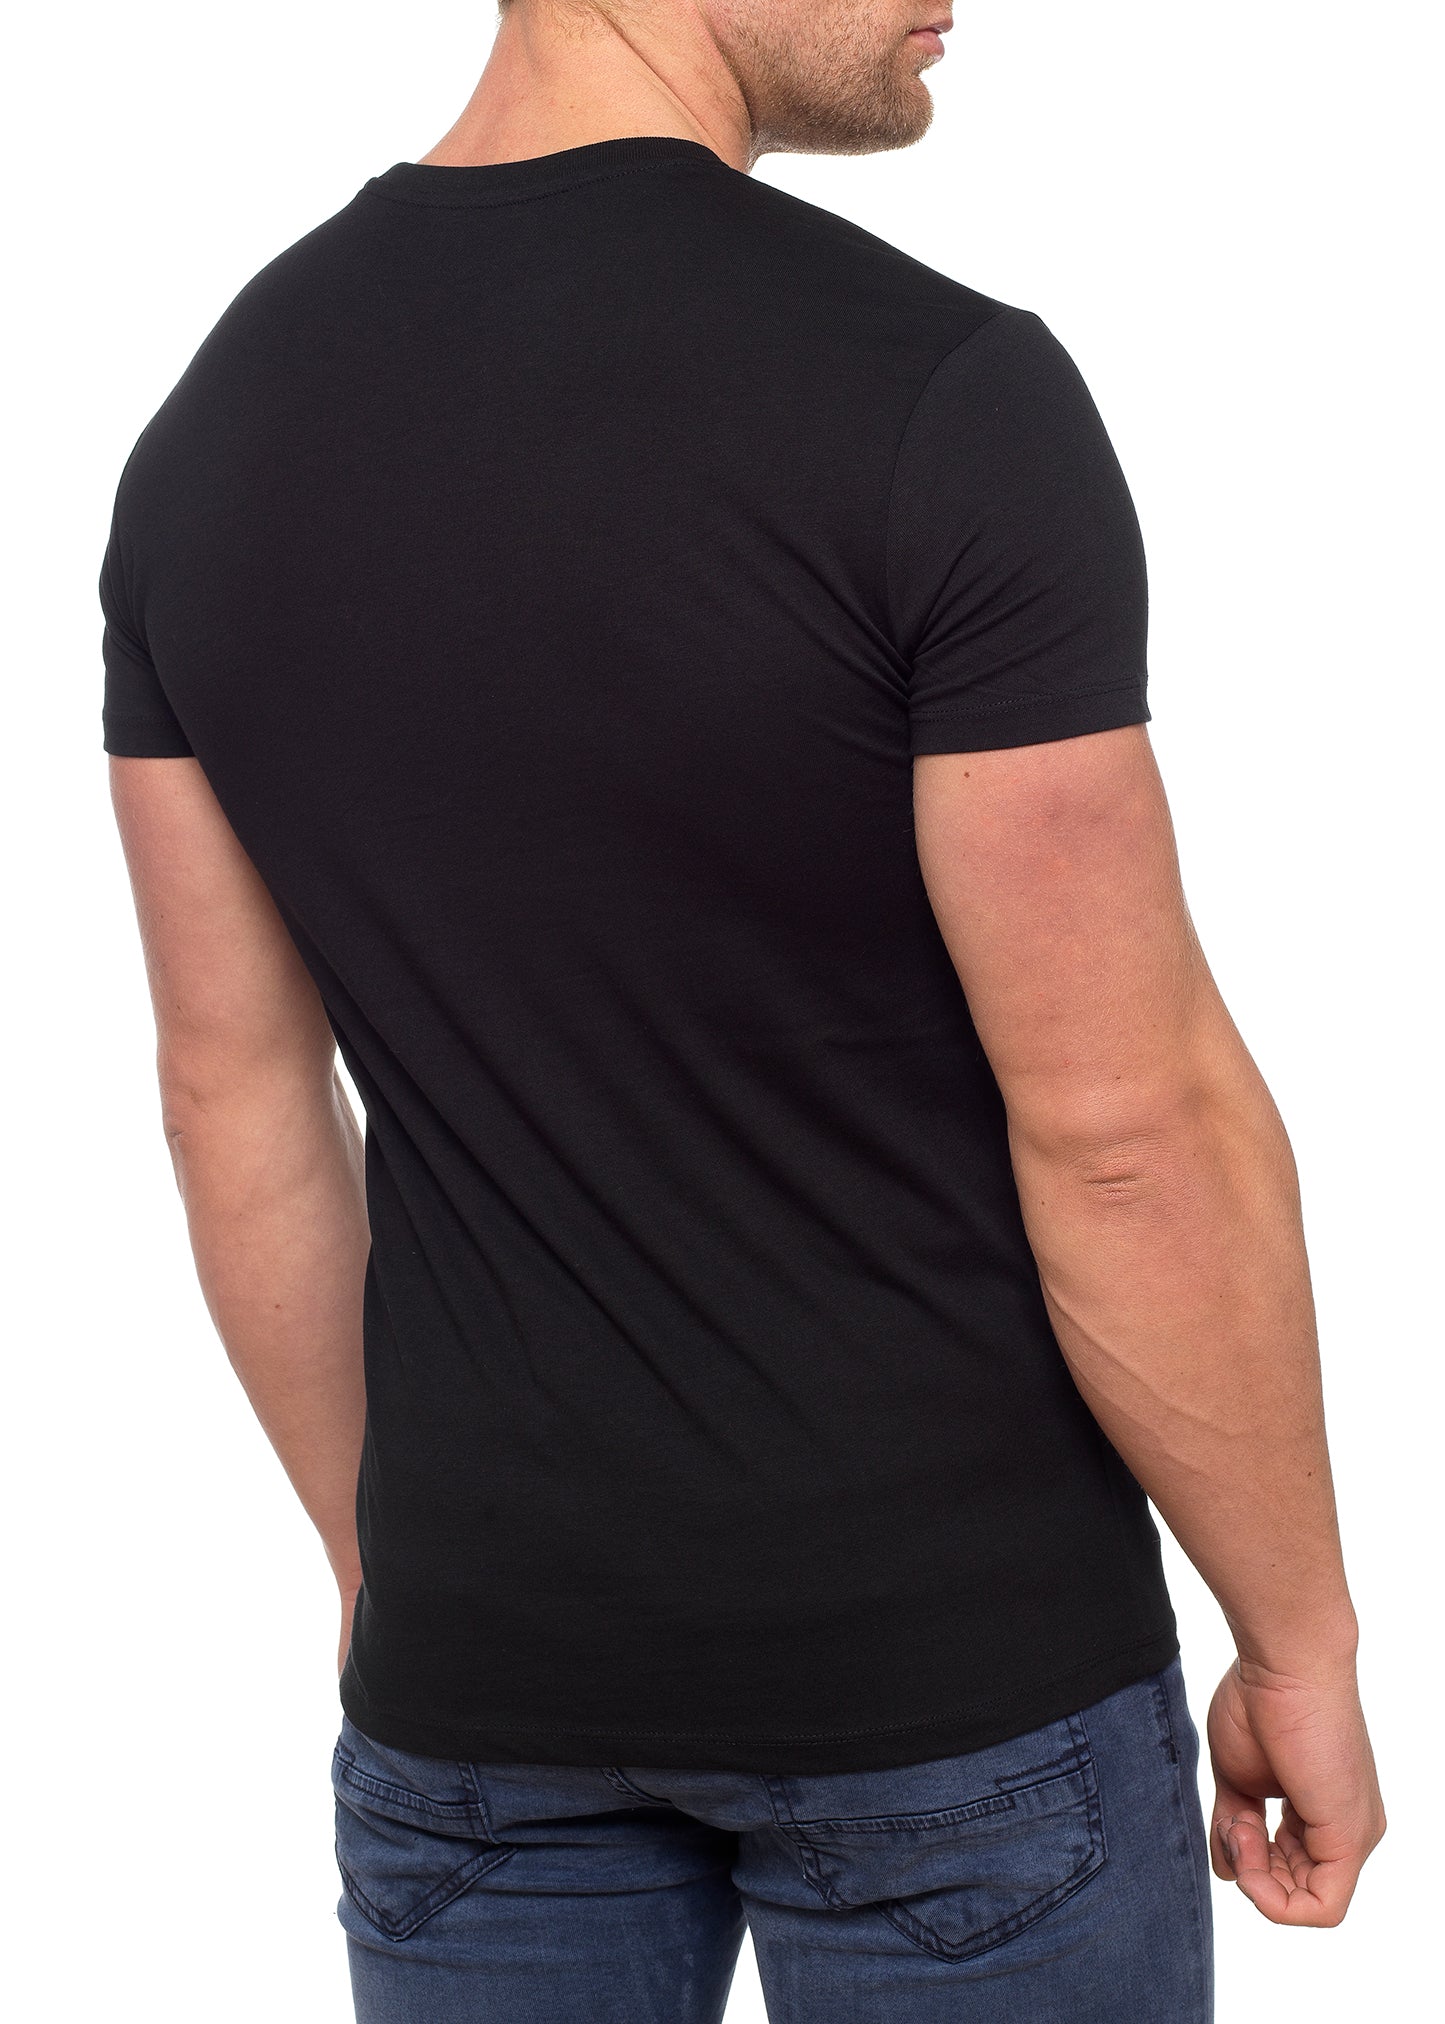 Mens Black Muscle Fit T Shirts